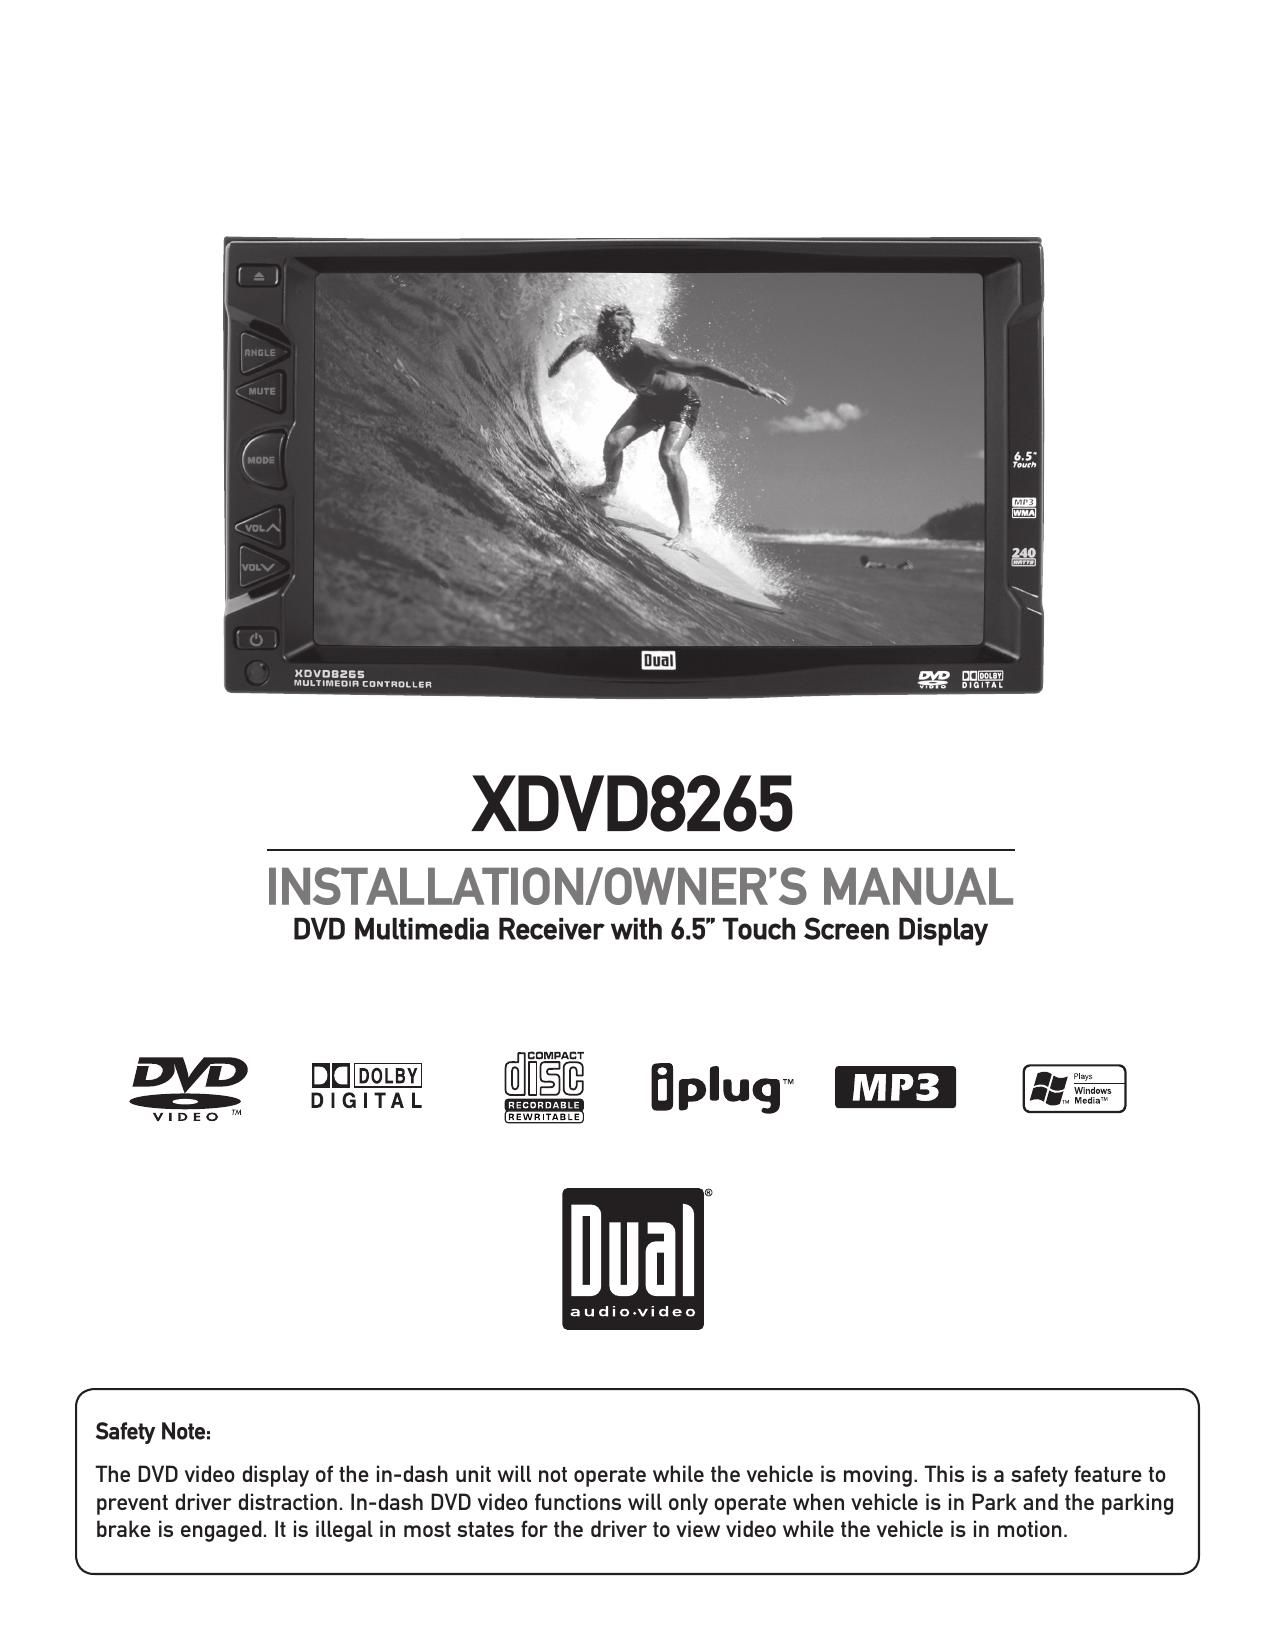 Dual XDVD 8265 Owners Manual